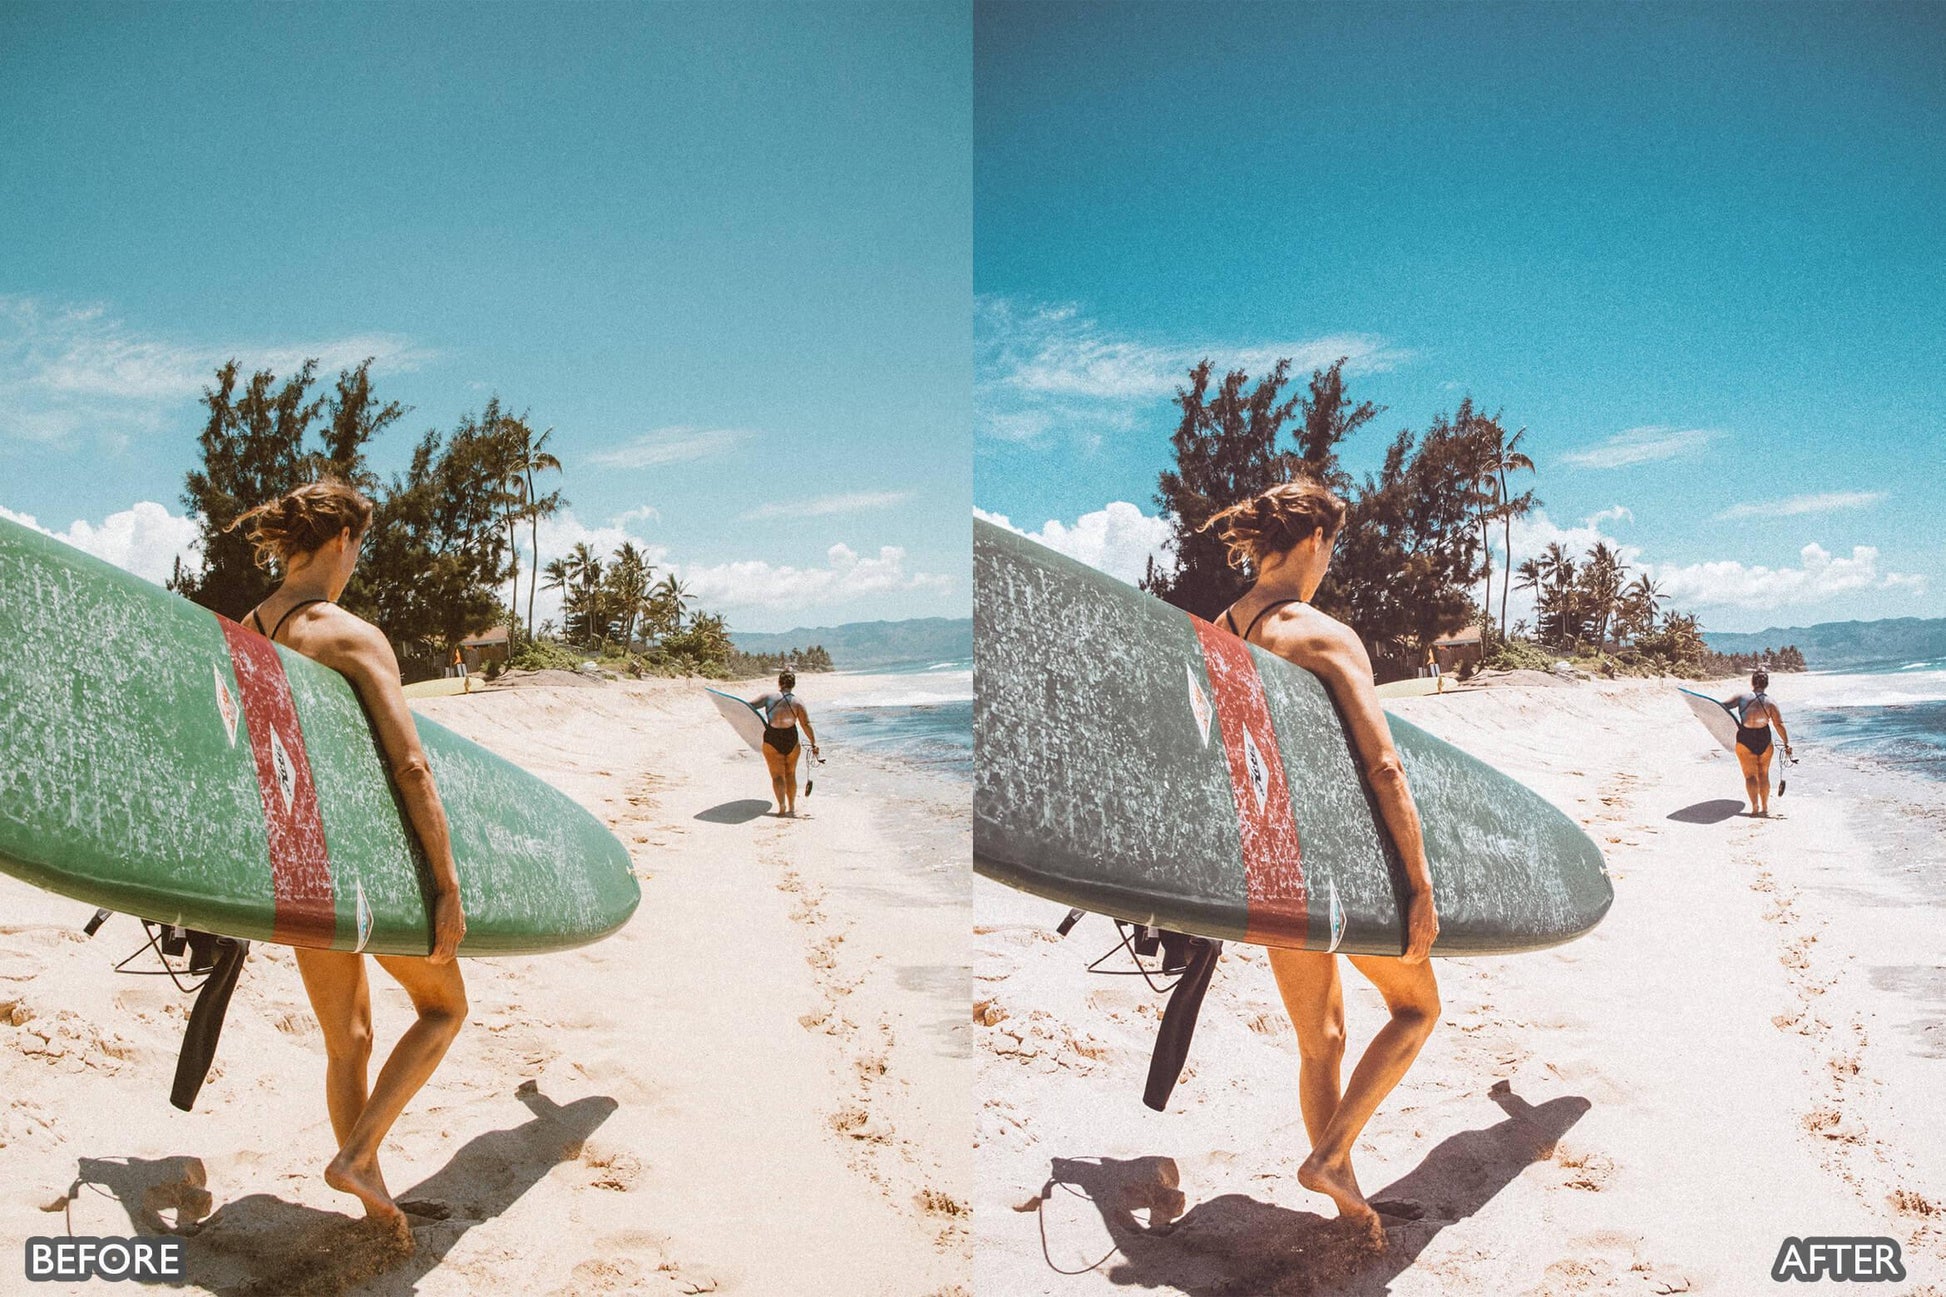 Lightroom Presets For Beach Photos - adobe lightroom presets, Blogger presets, Cinematic Presets, cream presets, instagram presets, lightroom presets, Portrait presets, presets before and after, professional lightroom presets, summer presets - aaapresets.com